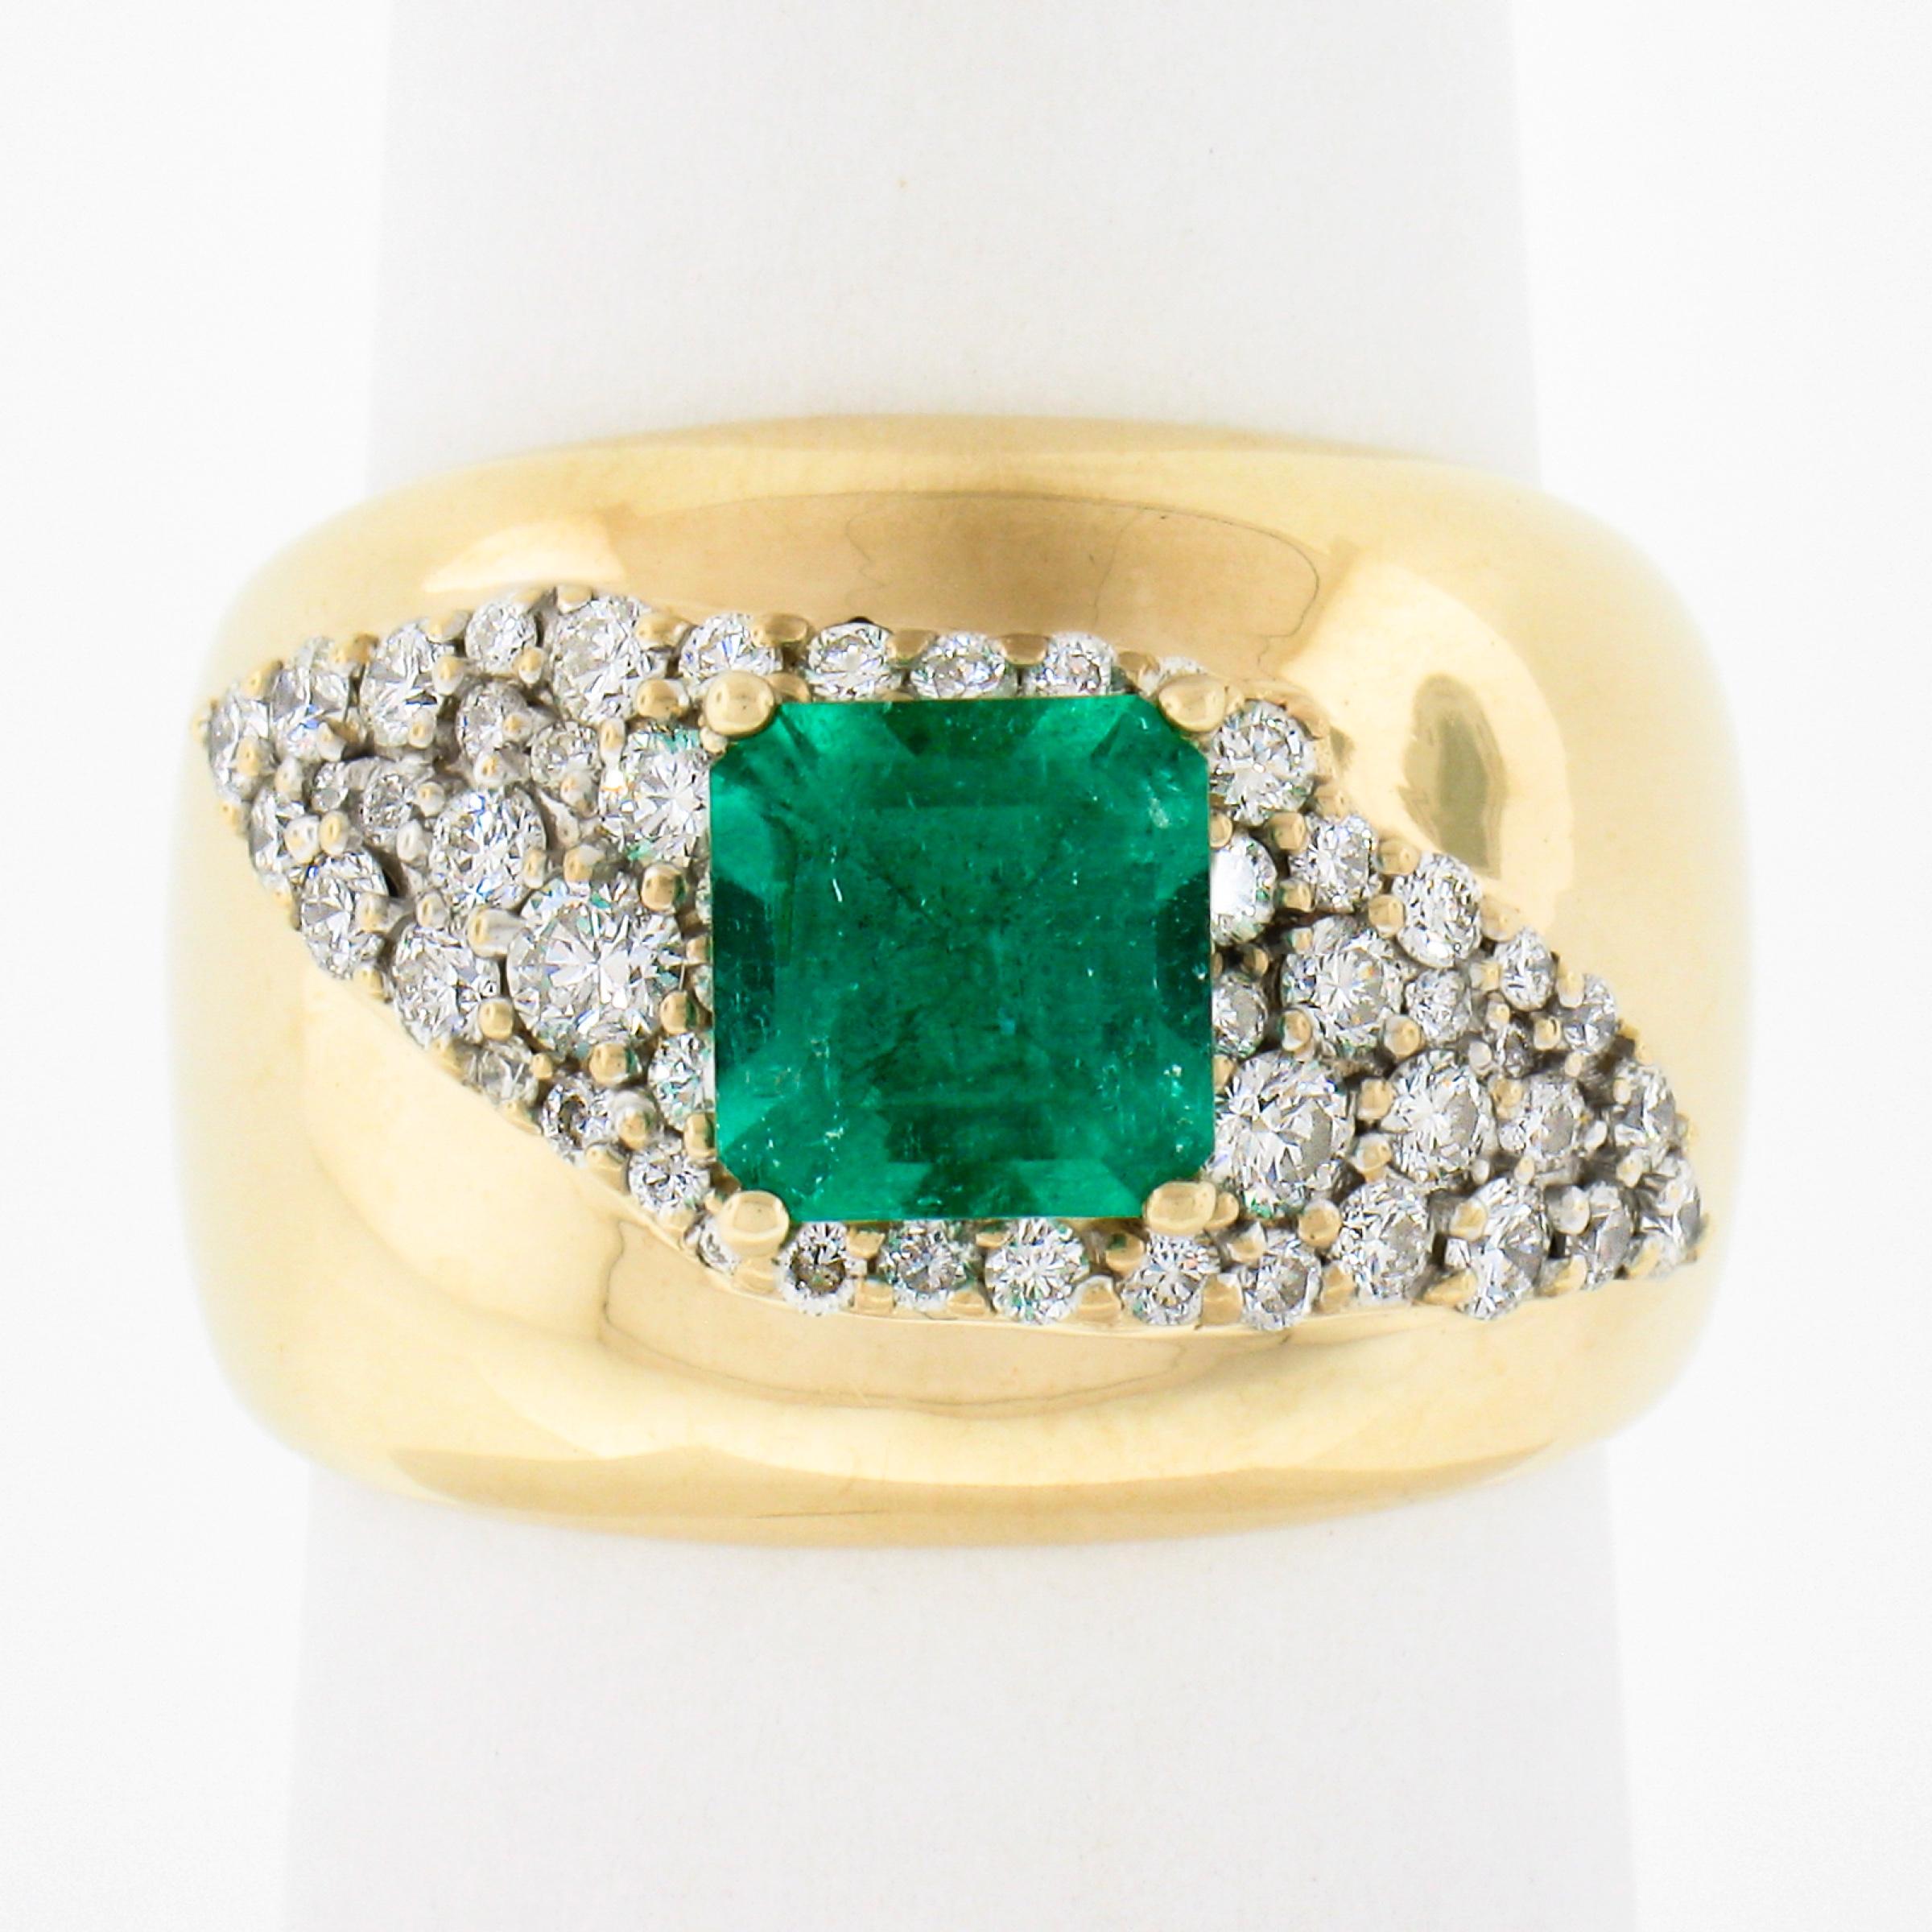 This unique and elegant cigar band ring is crafted in solid 14k yellow gold and features a smooth dome top set with a magnificent natural emerald stone that's further adorned with a diagonal design of pave set diamonds throughout. The emerald is a